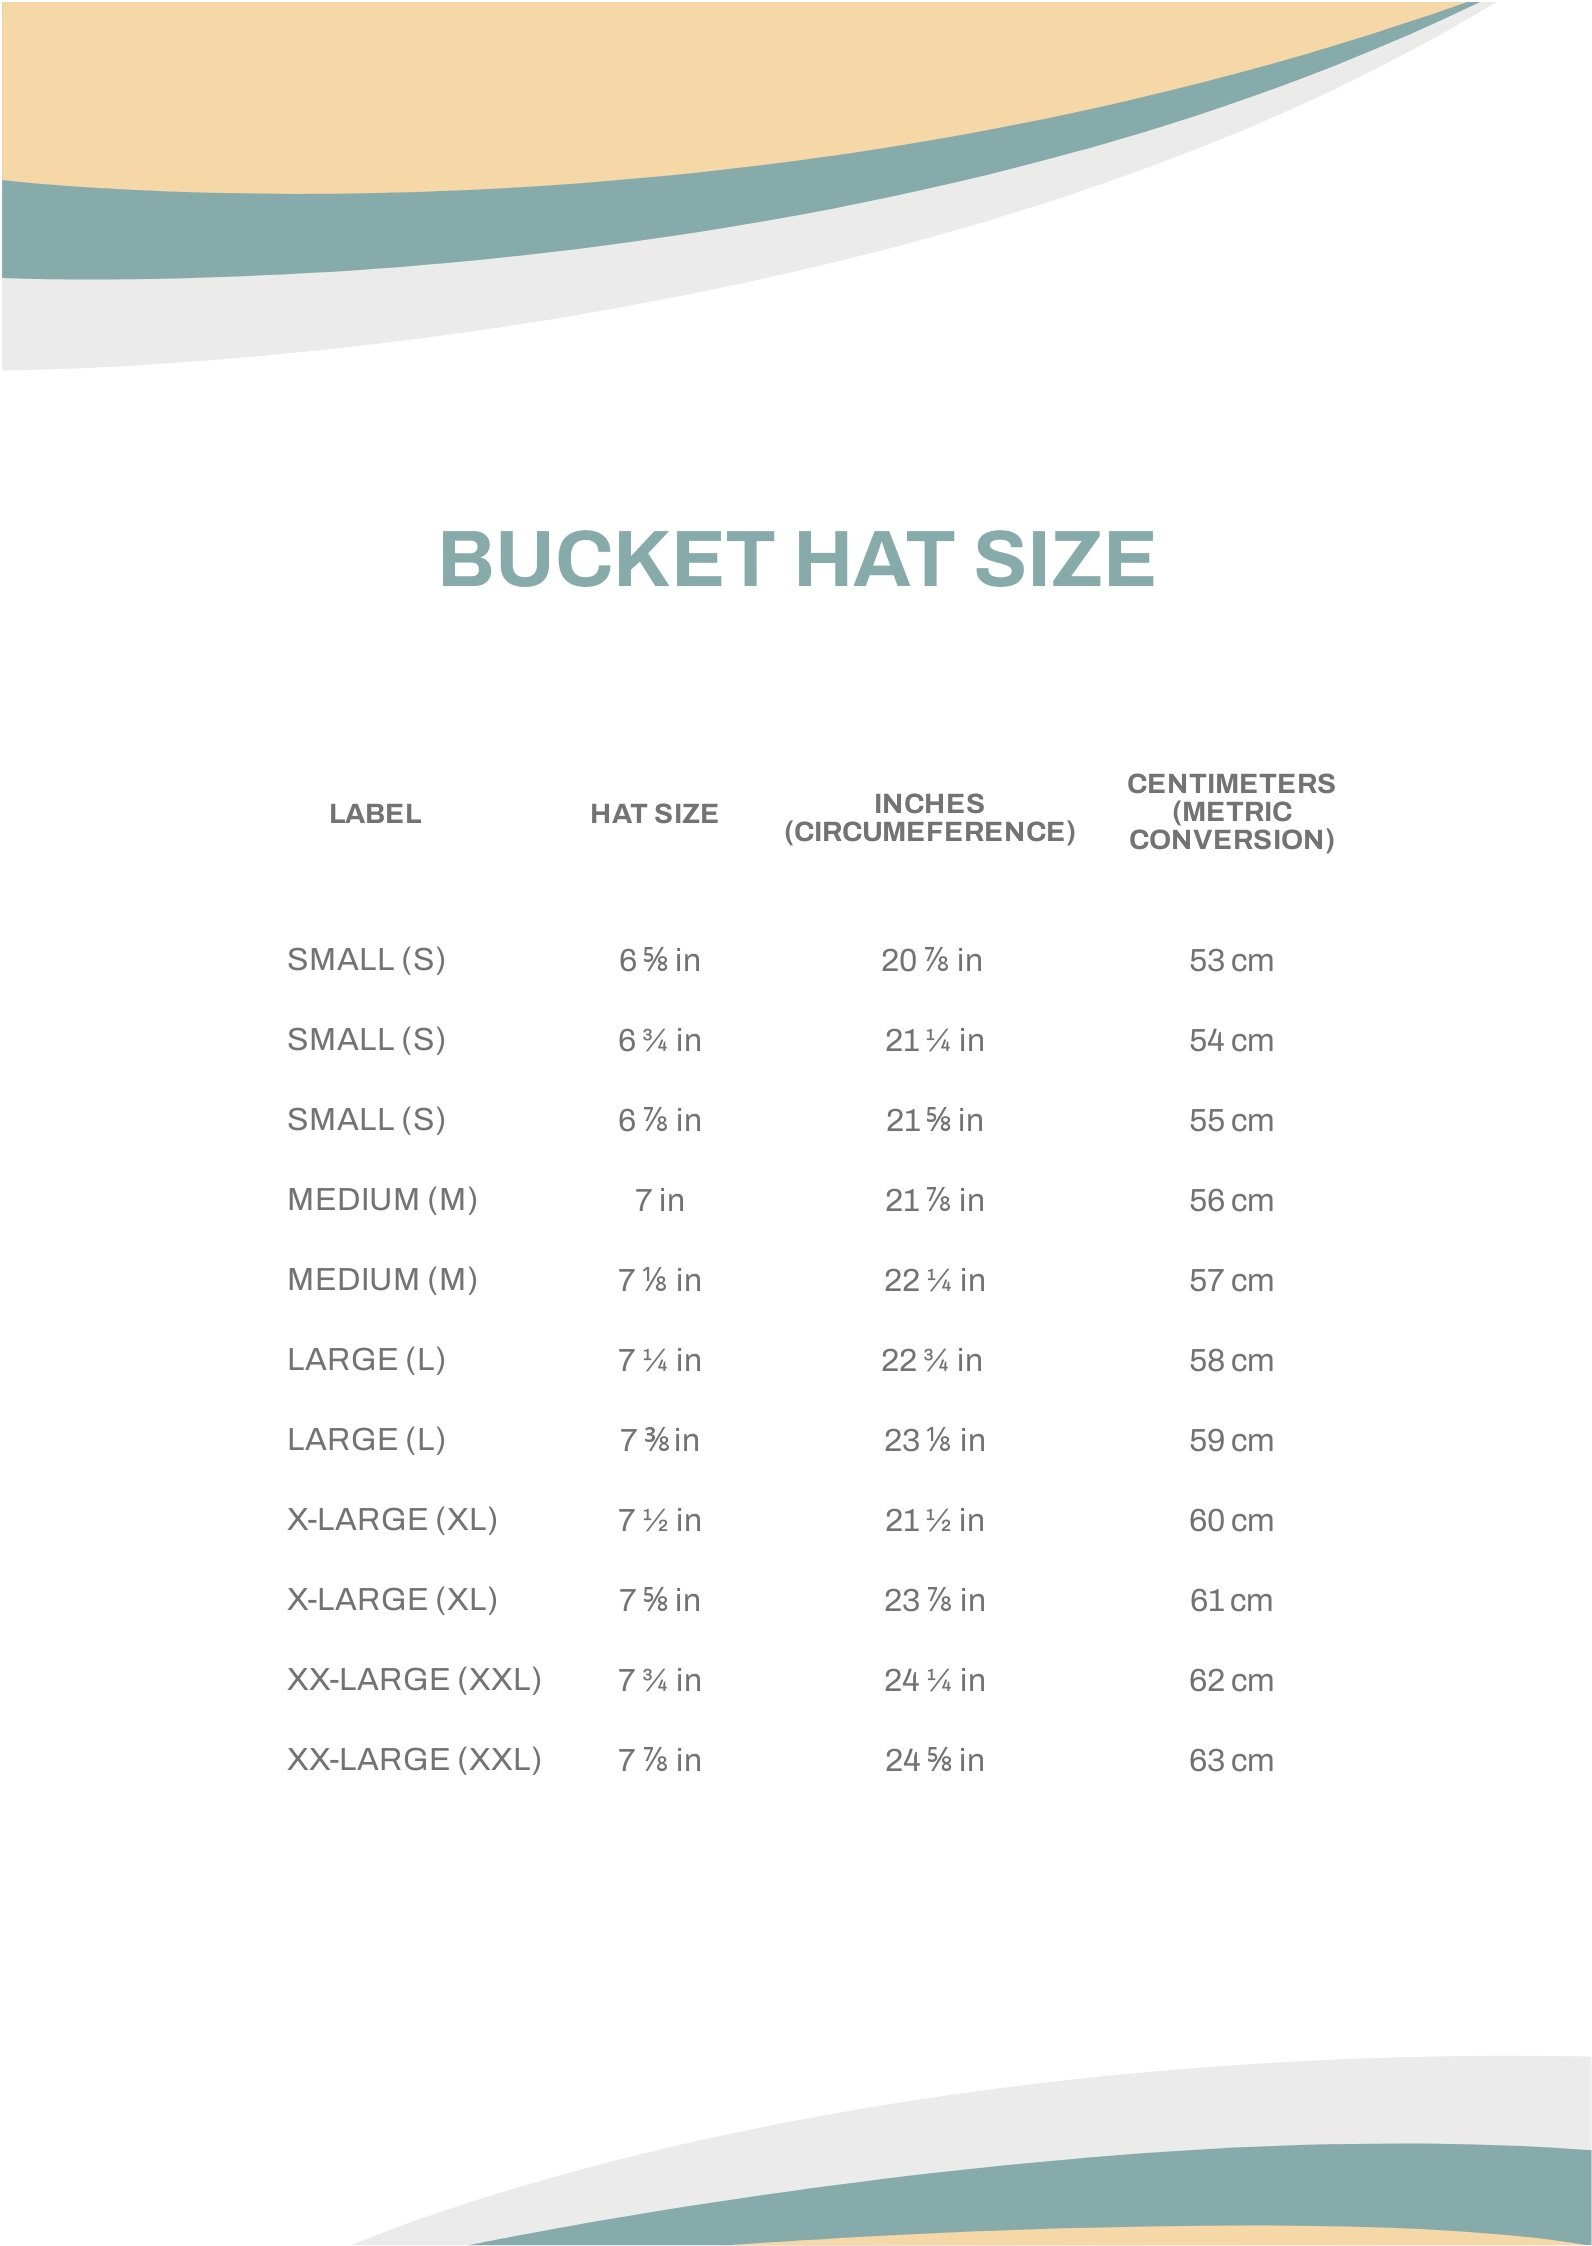 Free Bucket Hat Size Chart Download in PDF